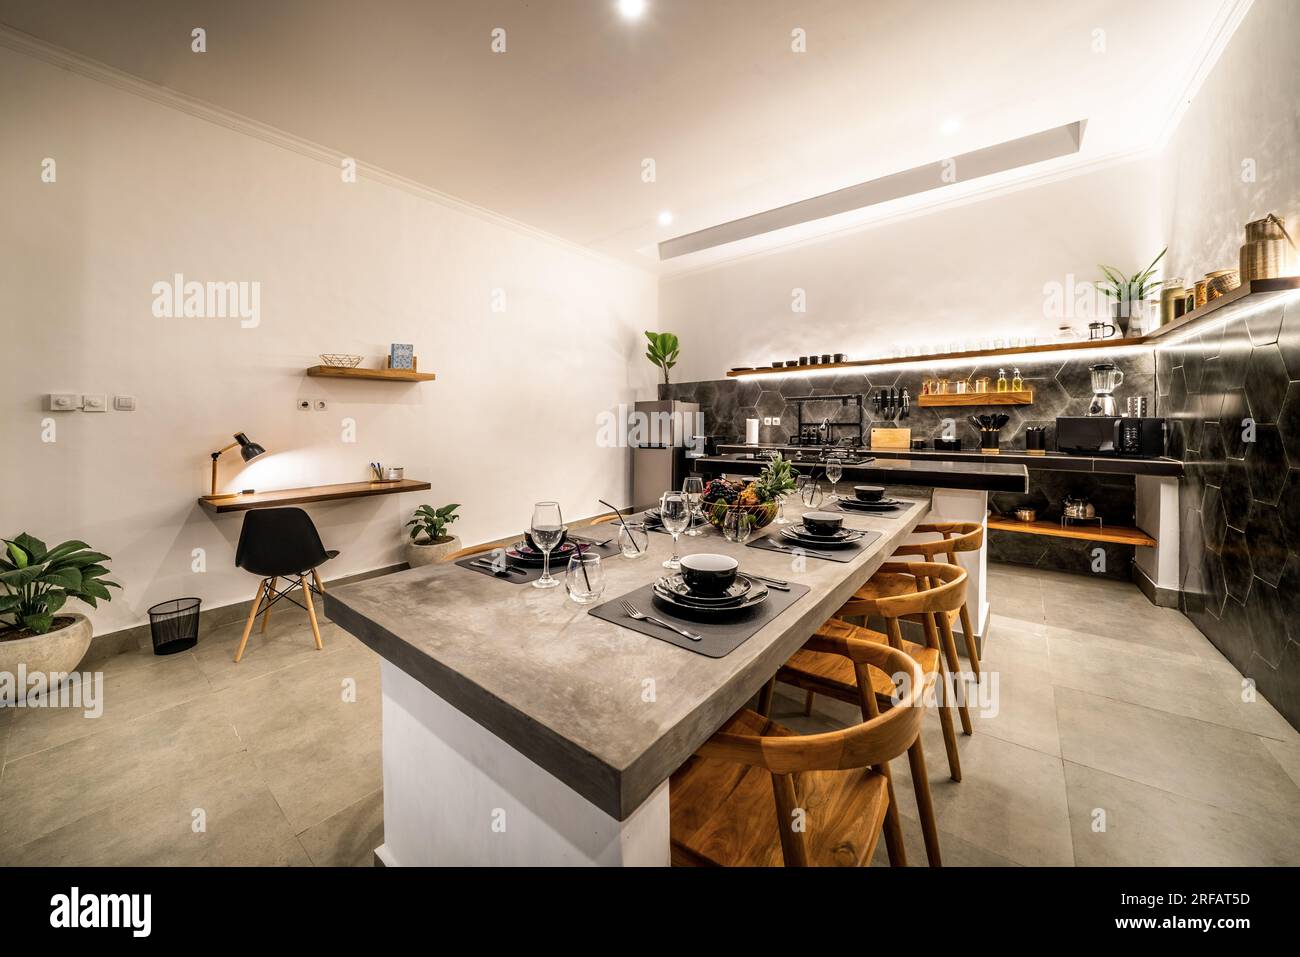 modern kitchen with appliances. Subtle lighting. dining table made of polished concrete. Stock Photo